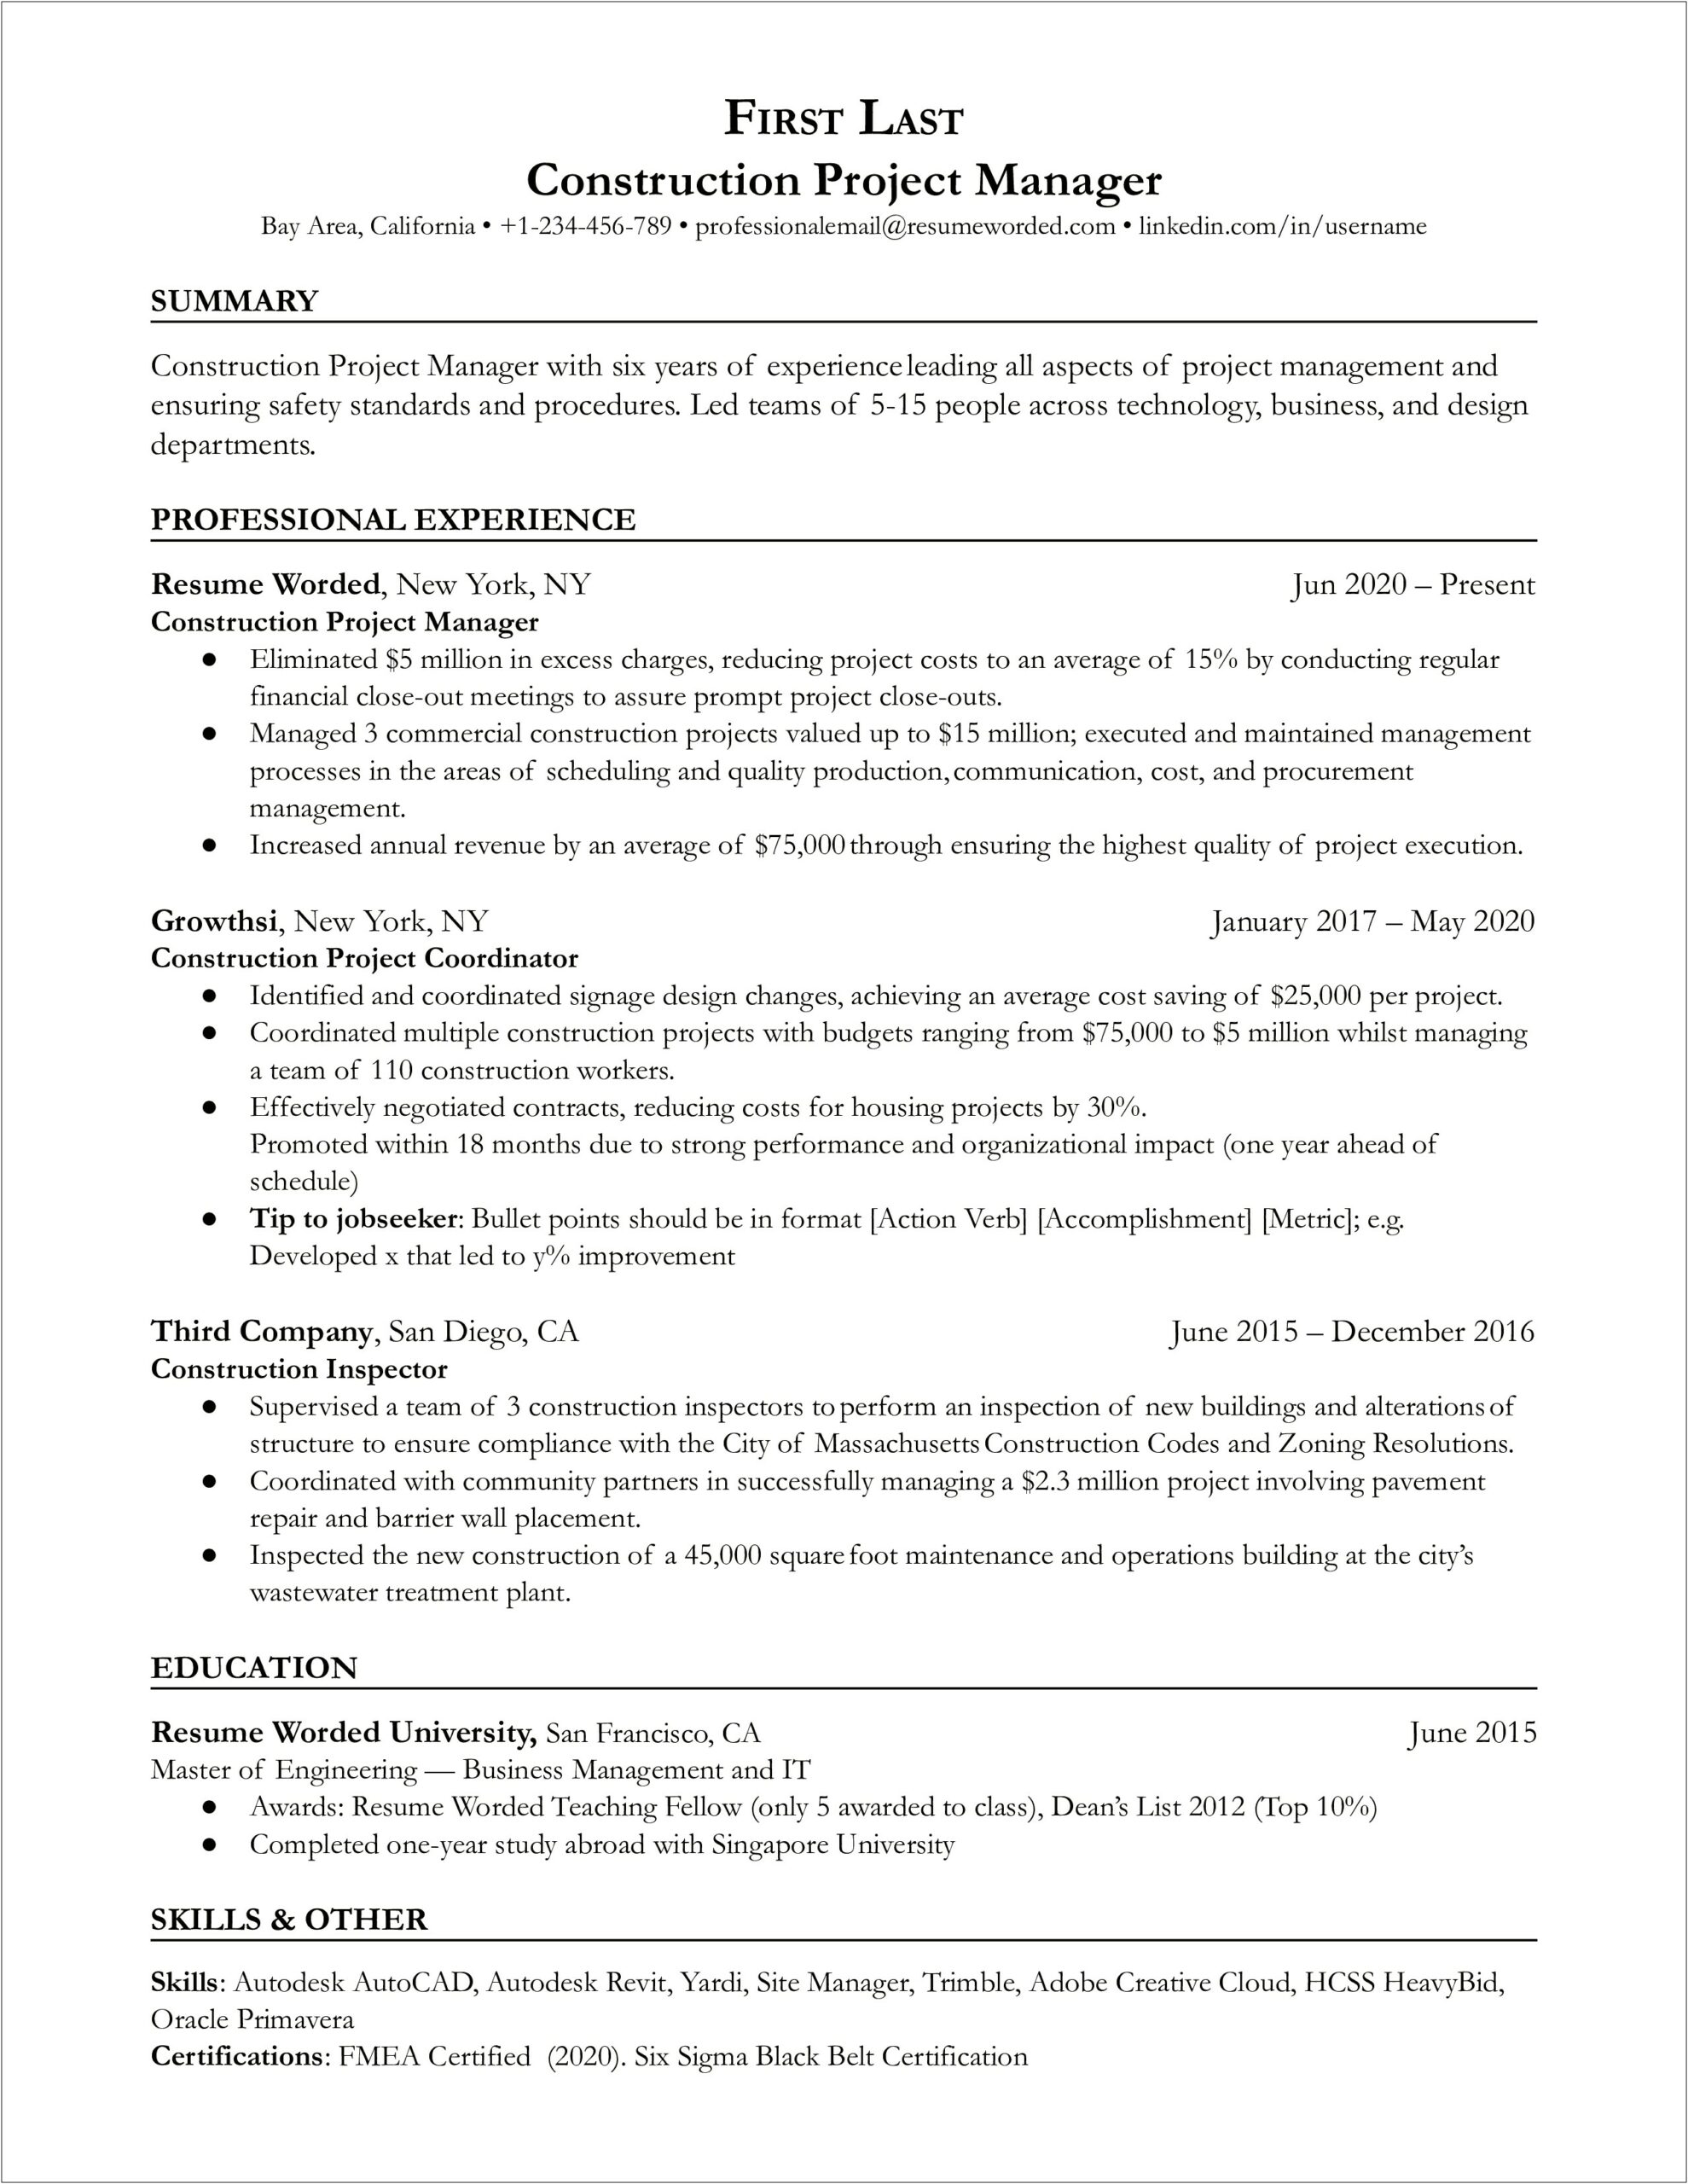 Construction Project Manager Job Duties For Resume